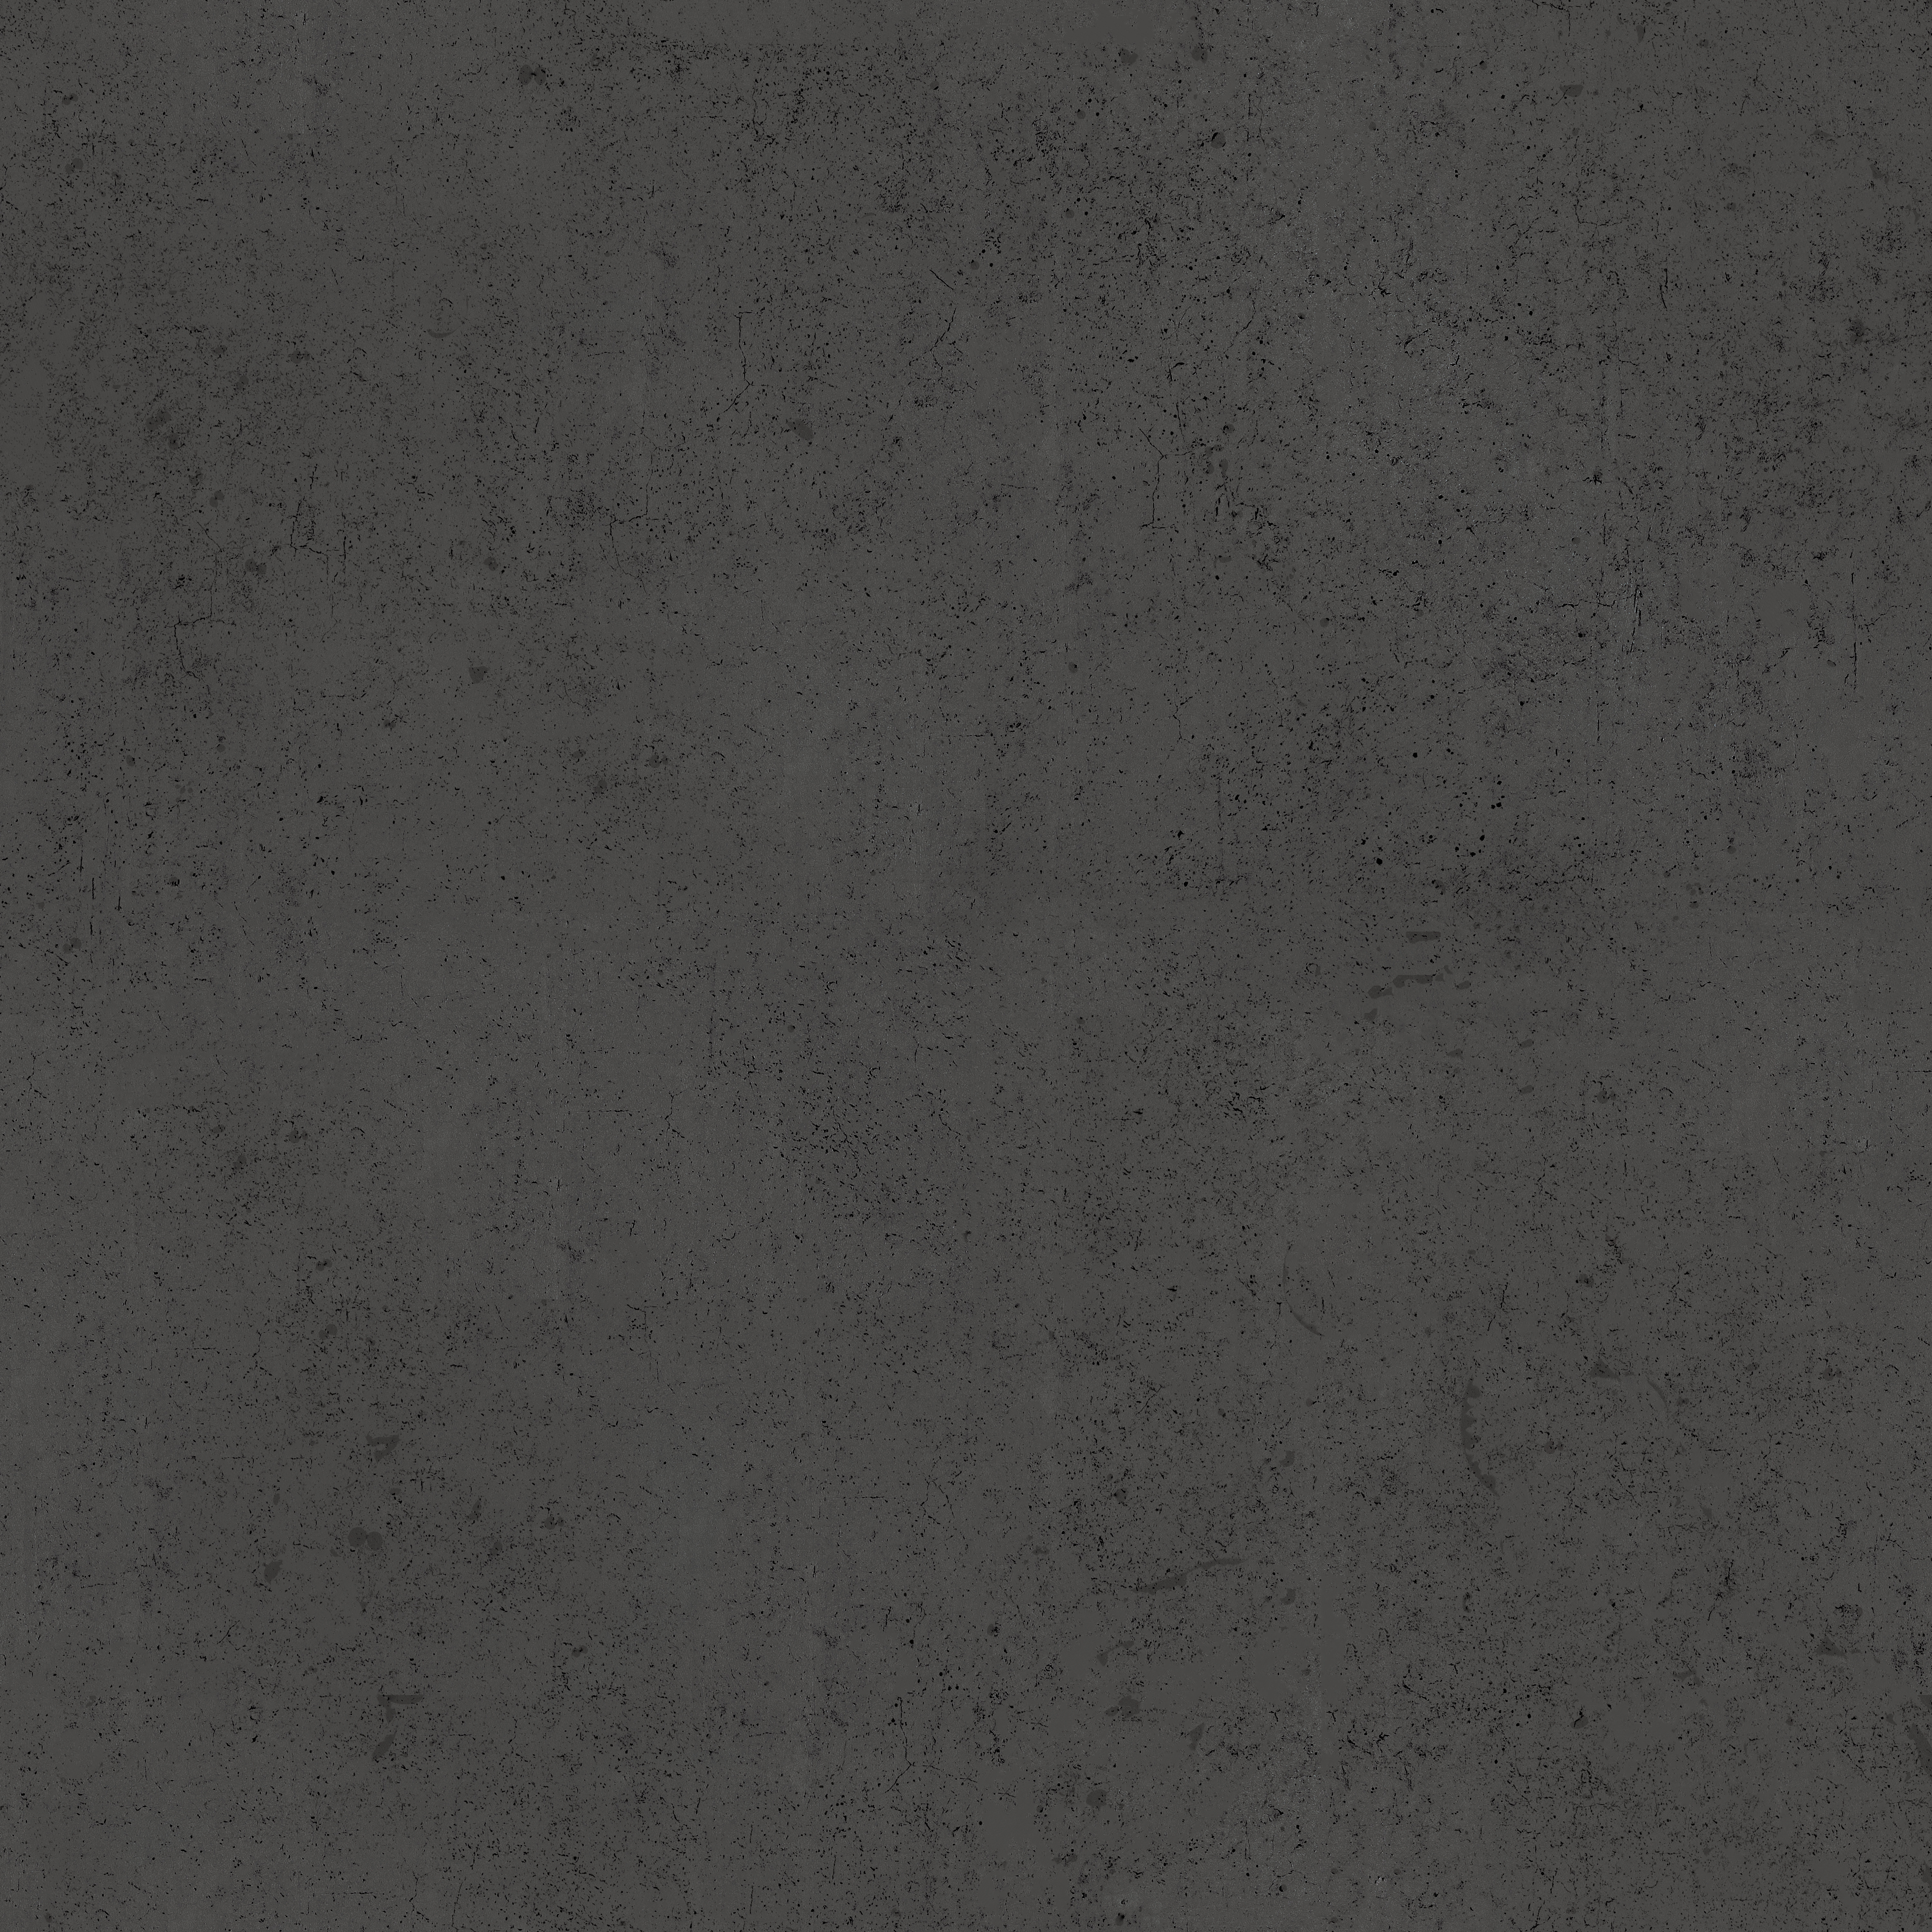 Charcoal Concrete Wallpaper, Peel and Stick, 2' x 10' - Image 1